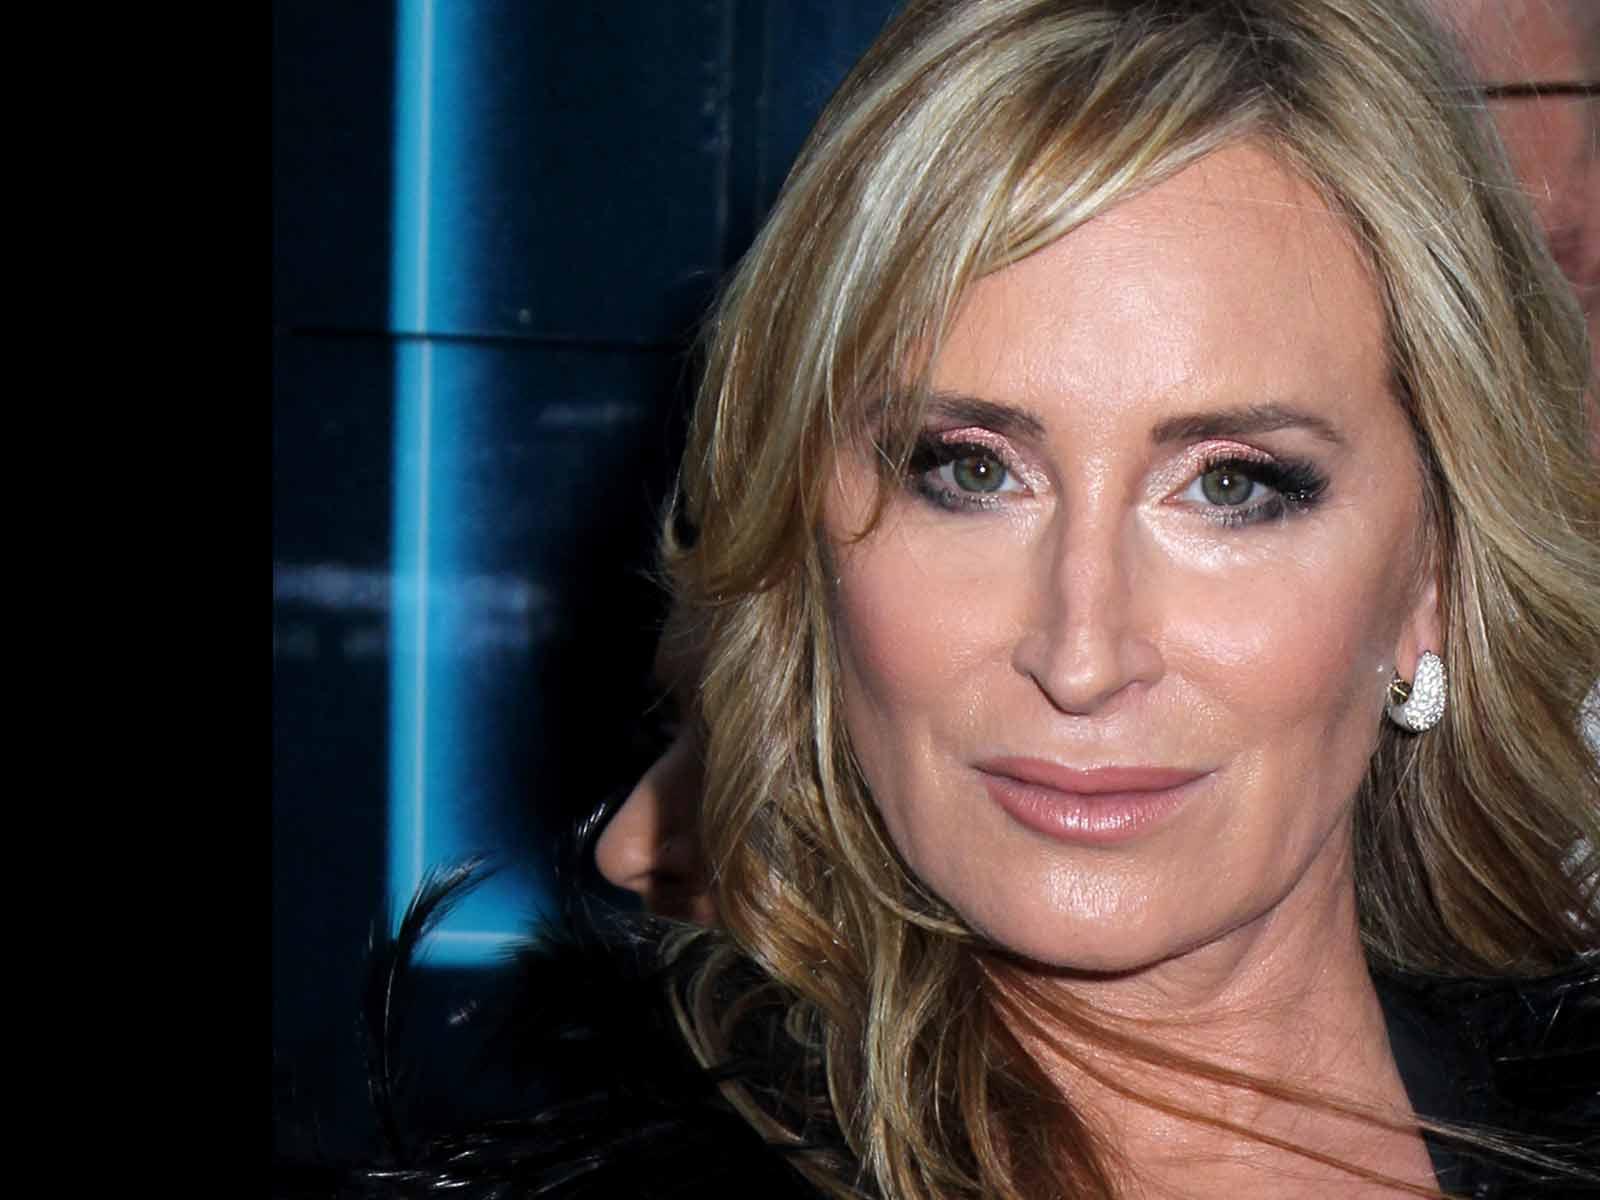 ‘RHONY’ Star Sonja Morgan Accidentally Invites (Then Disinvites) 580 People to a Party